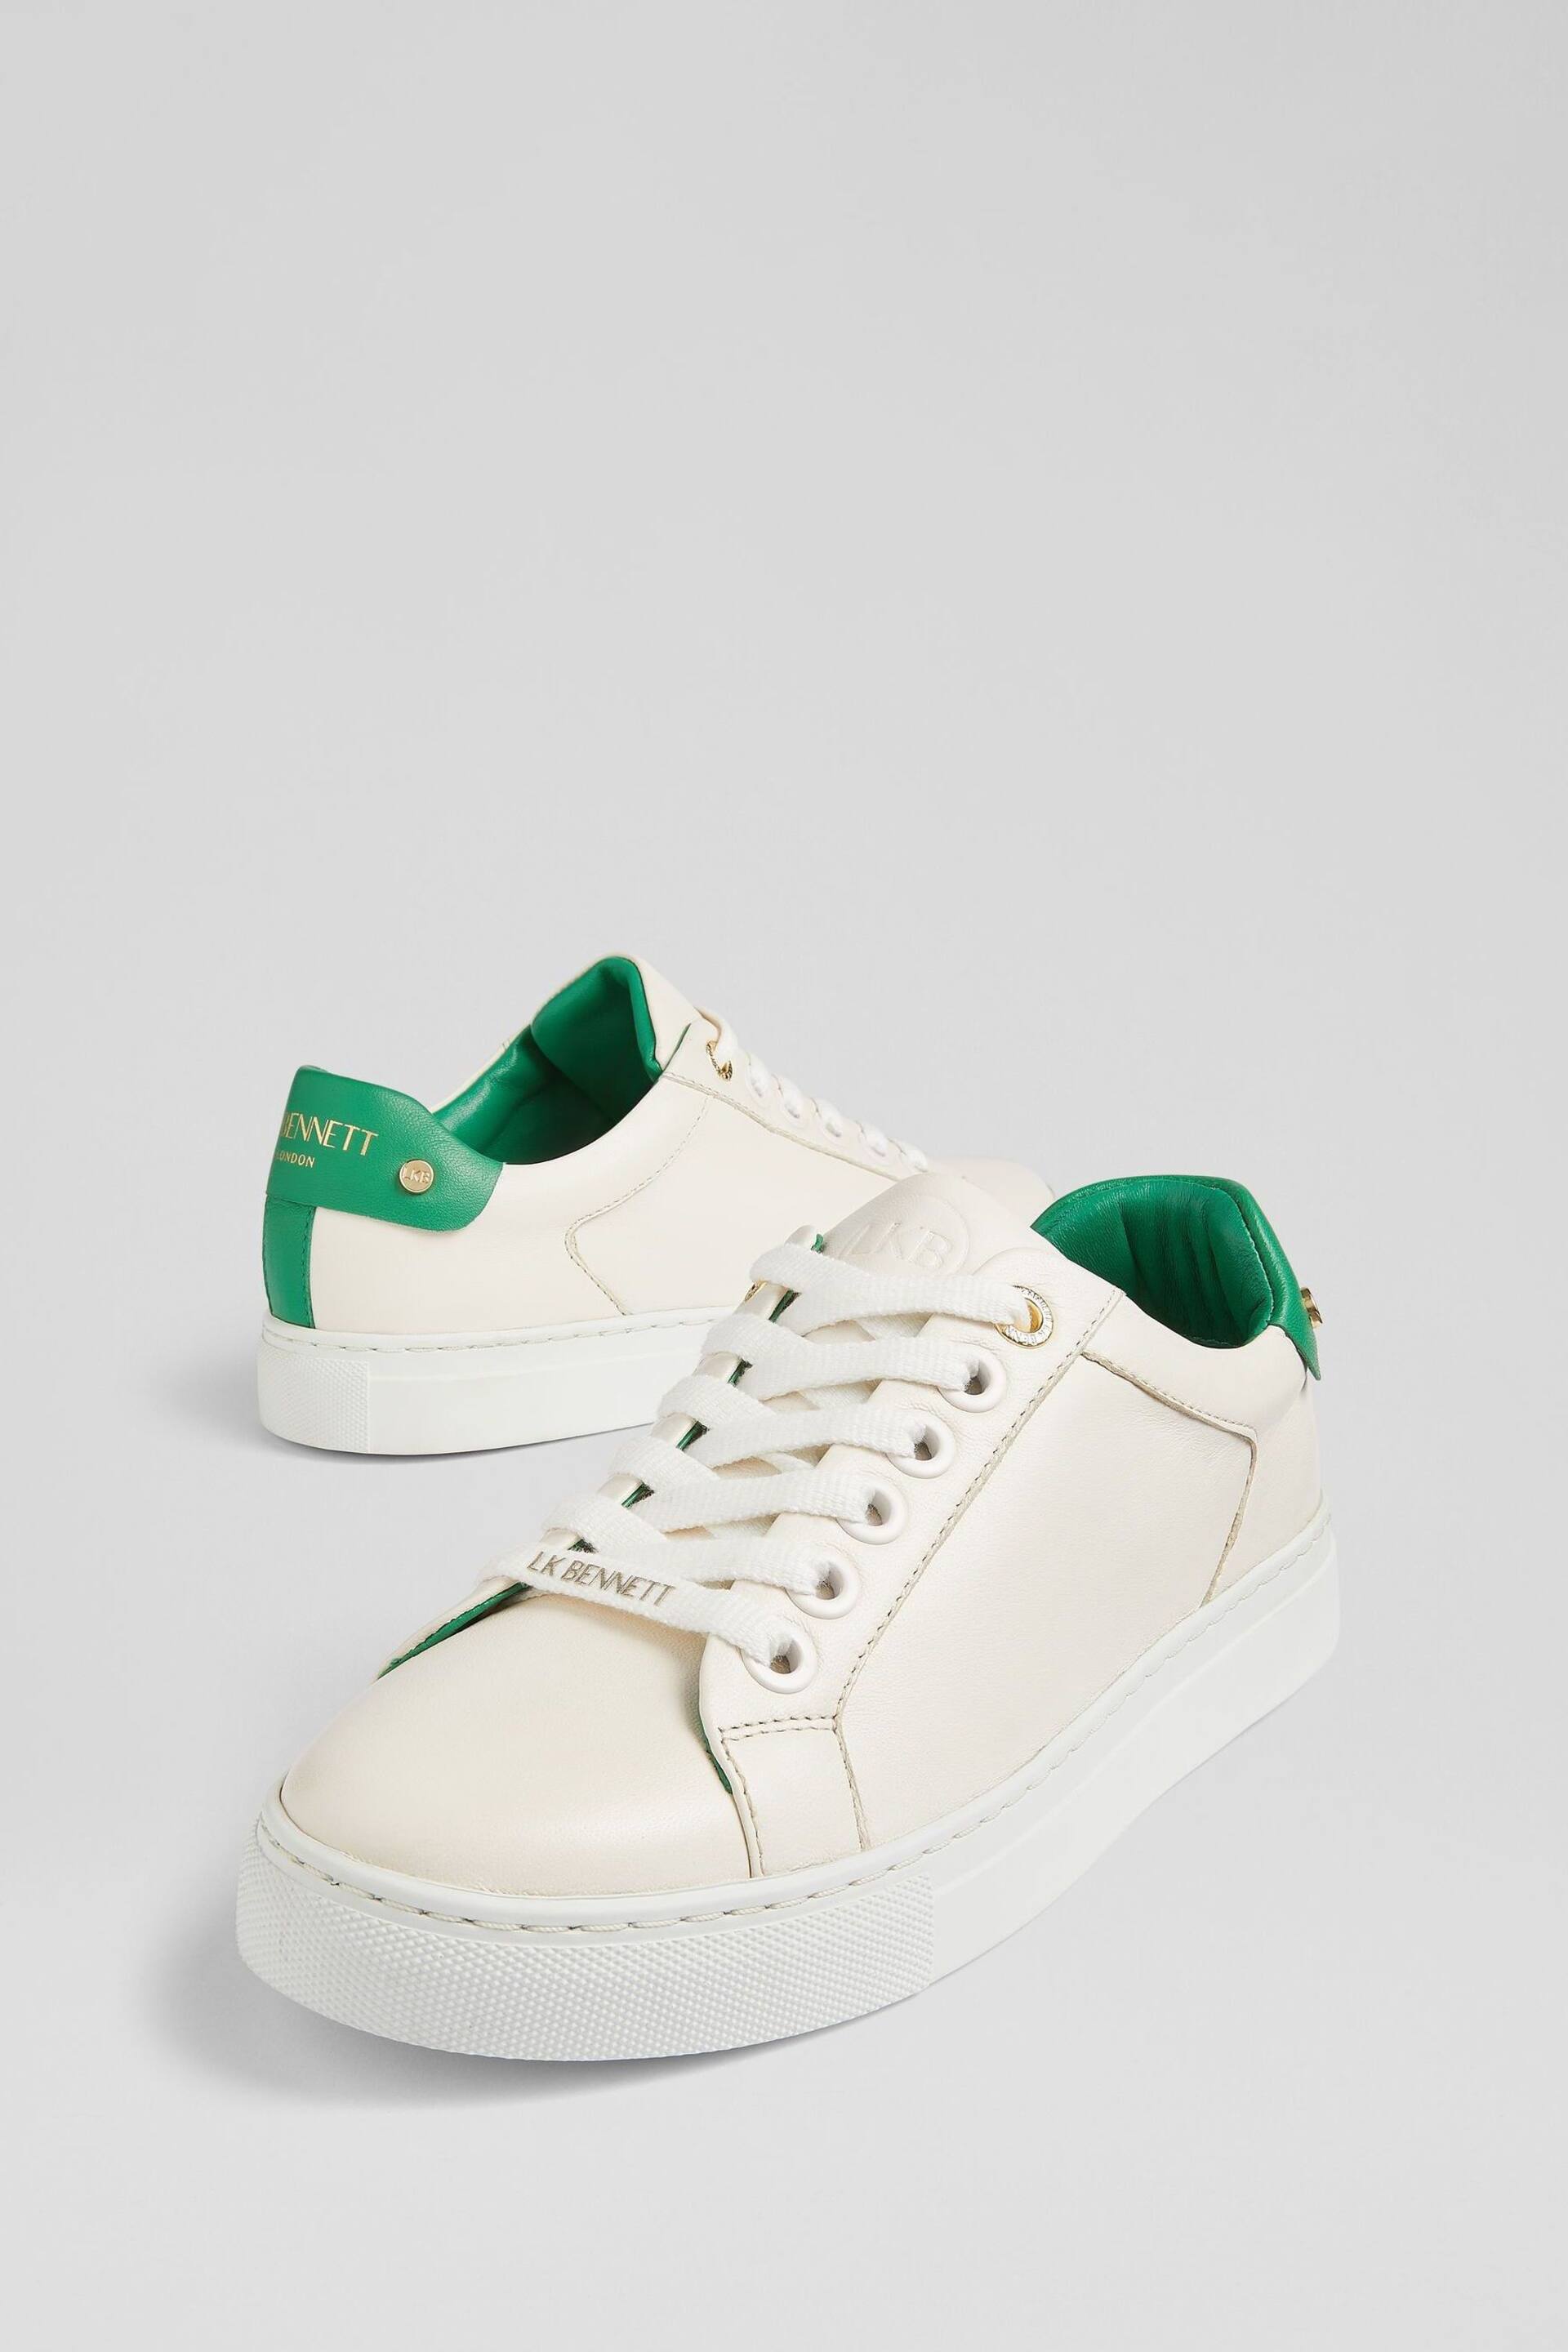 LK Bennett Signature Leather Trainers - Image 2 of 7